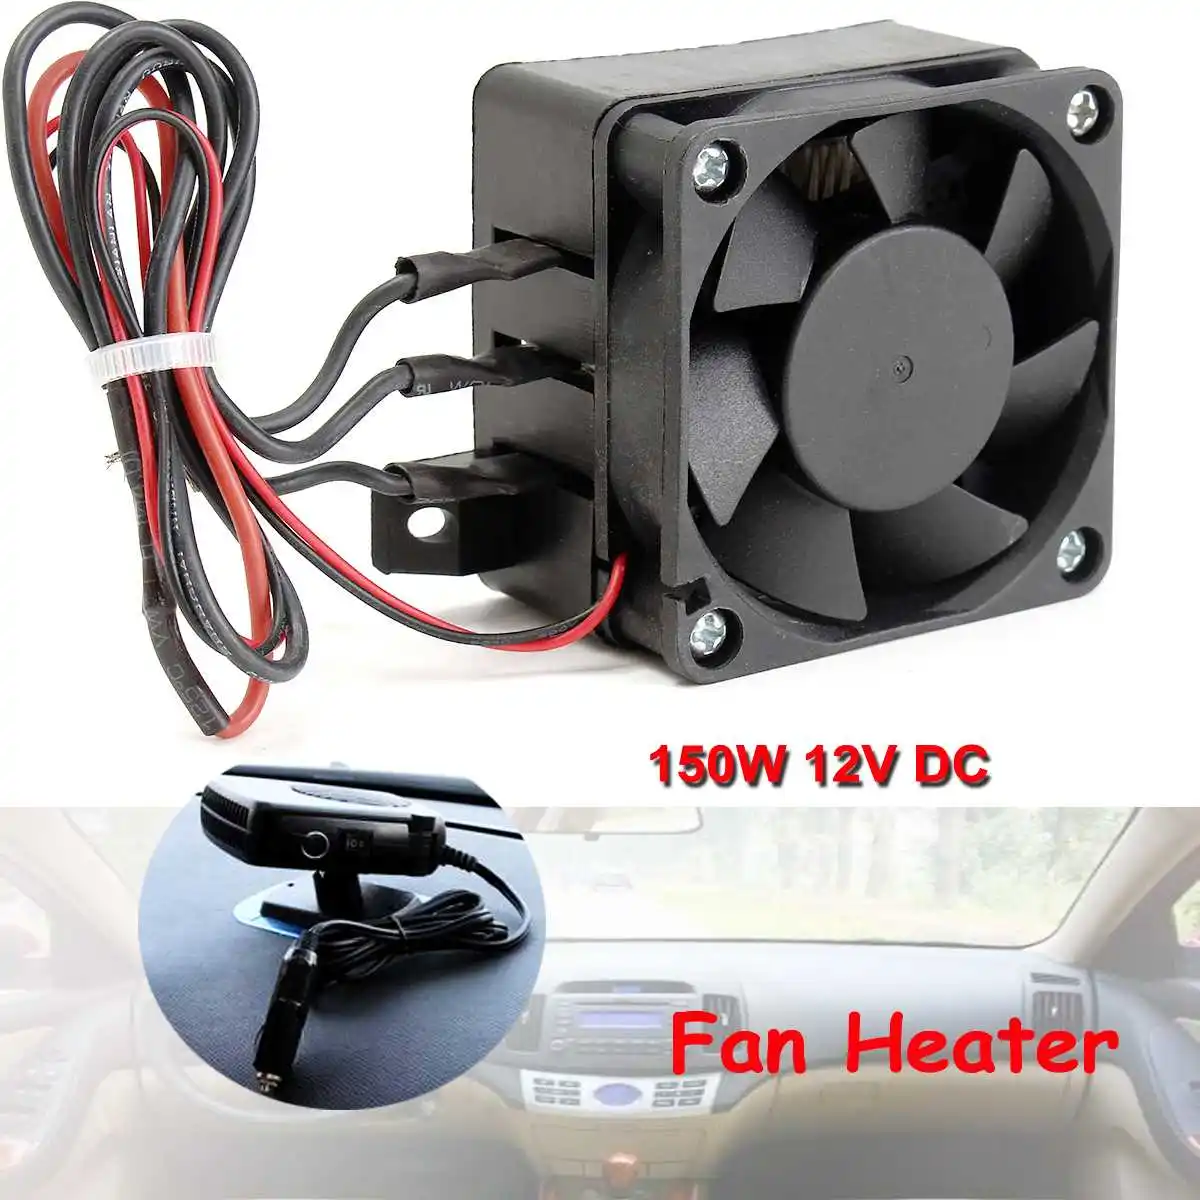 

DC 12V 150W PTC Fan Heater Constant Temperature Incubator With Connection Cable For Space Air Convection Heating